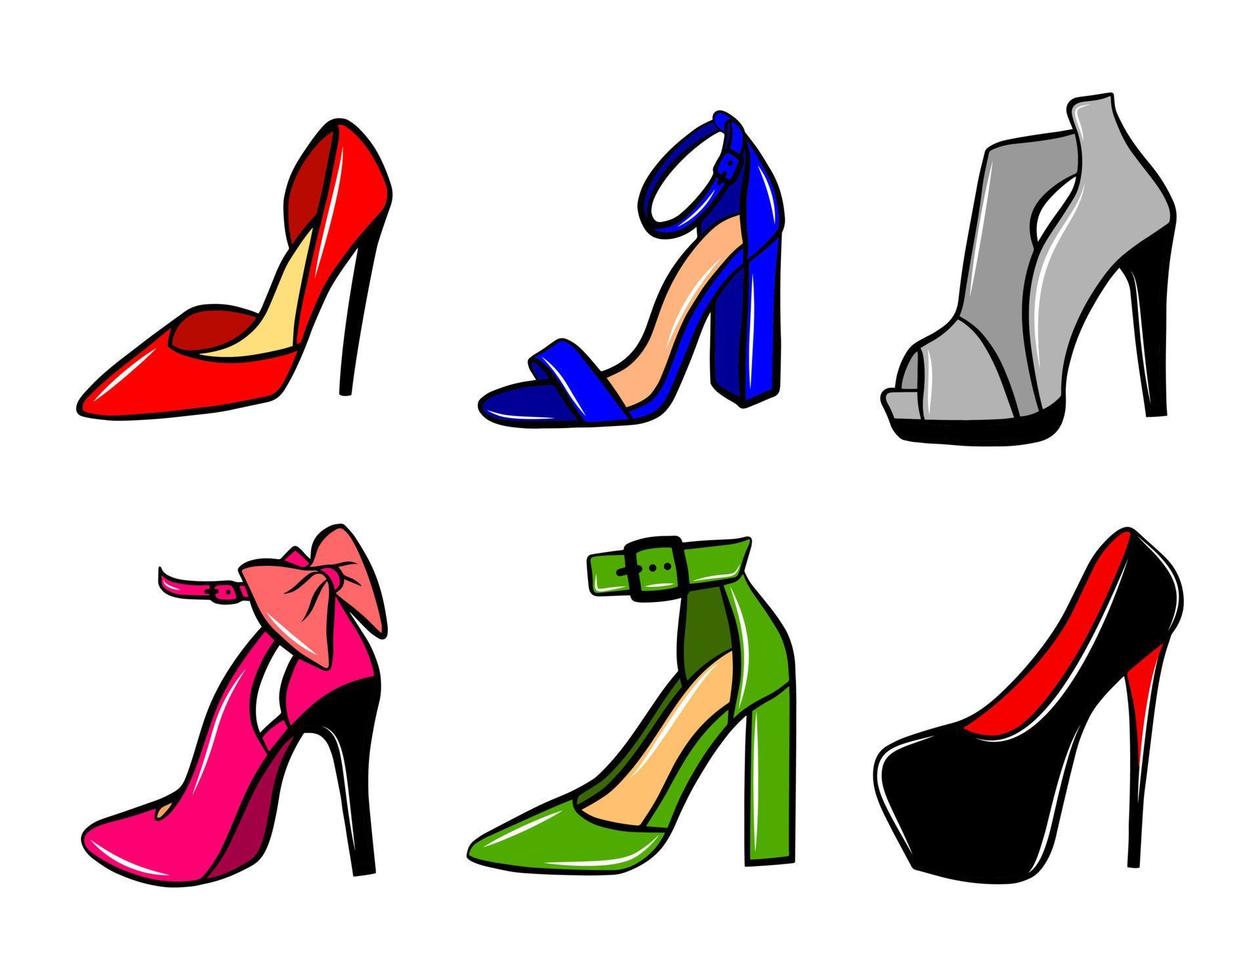 Woman shoes icon set isolated on white background. Colorful hand drawn vector fashion illustration. Beauty and glamour outline silhouette. Logo design element.